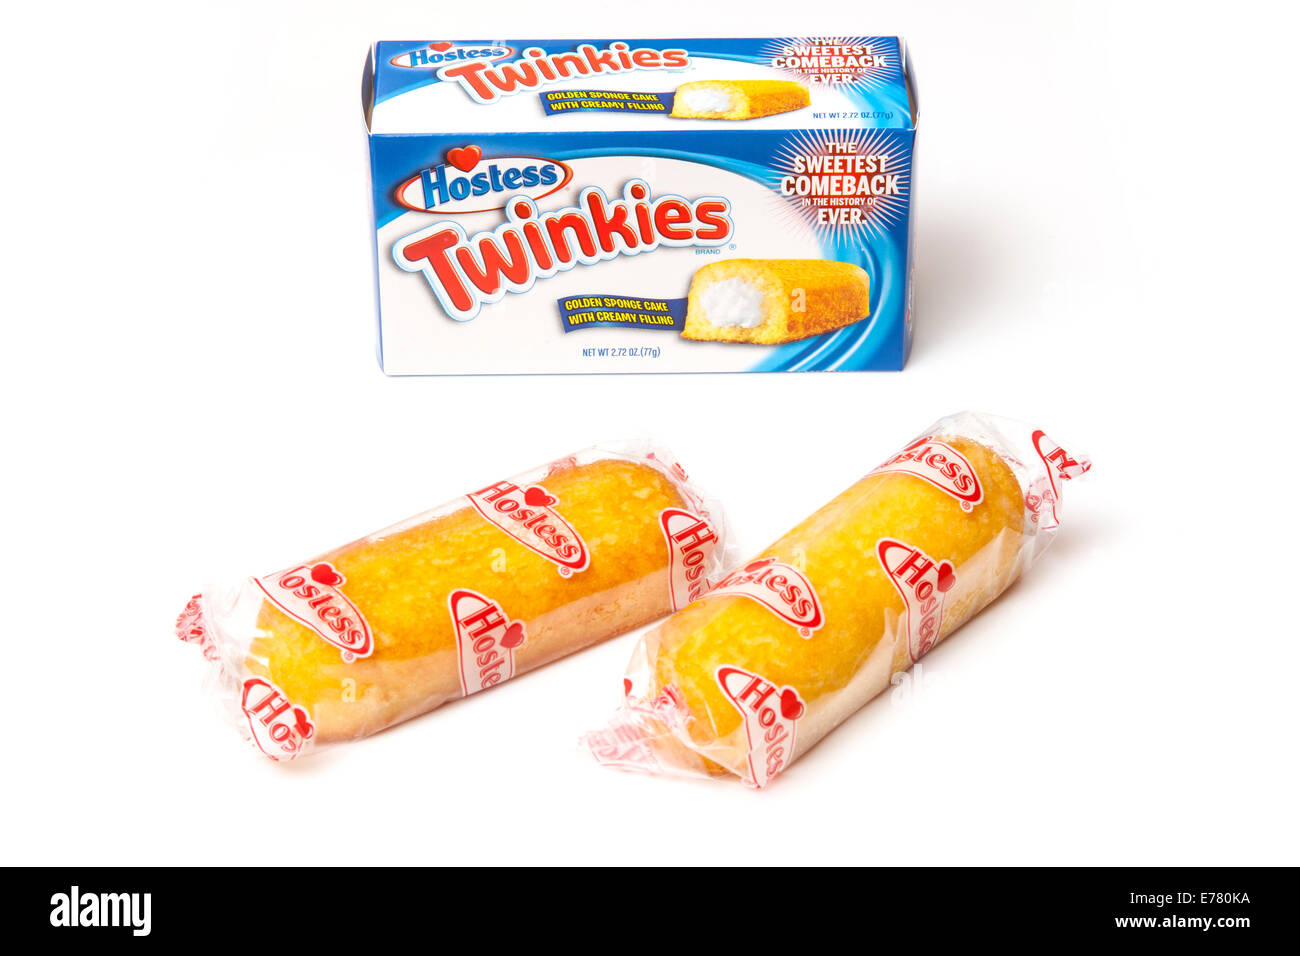 Calories in Twinkies, Golden Sponge Cake with Creamy Filling from Hostess